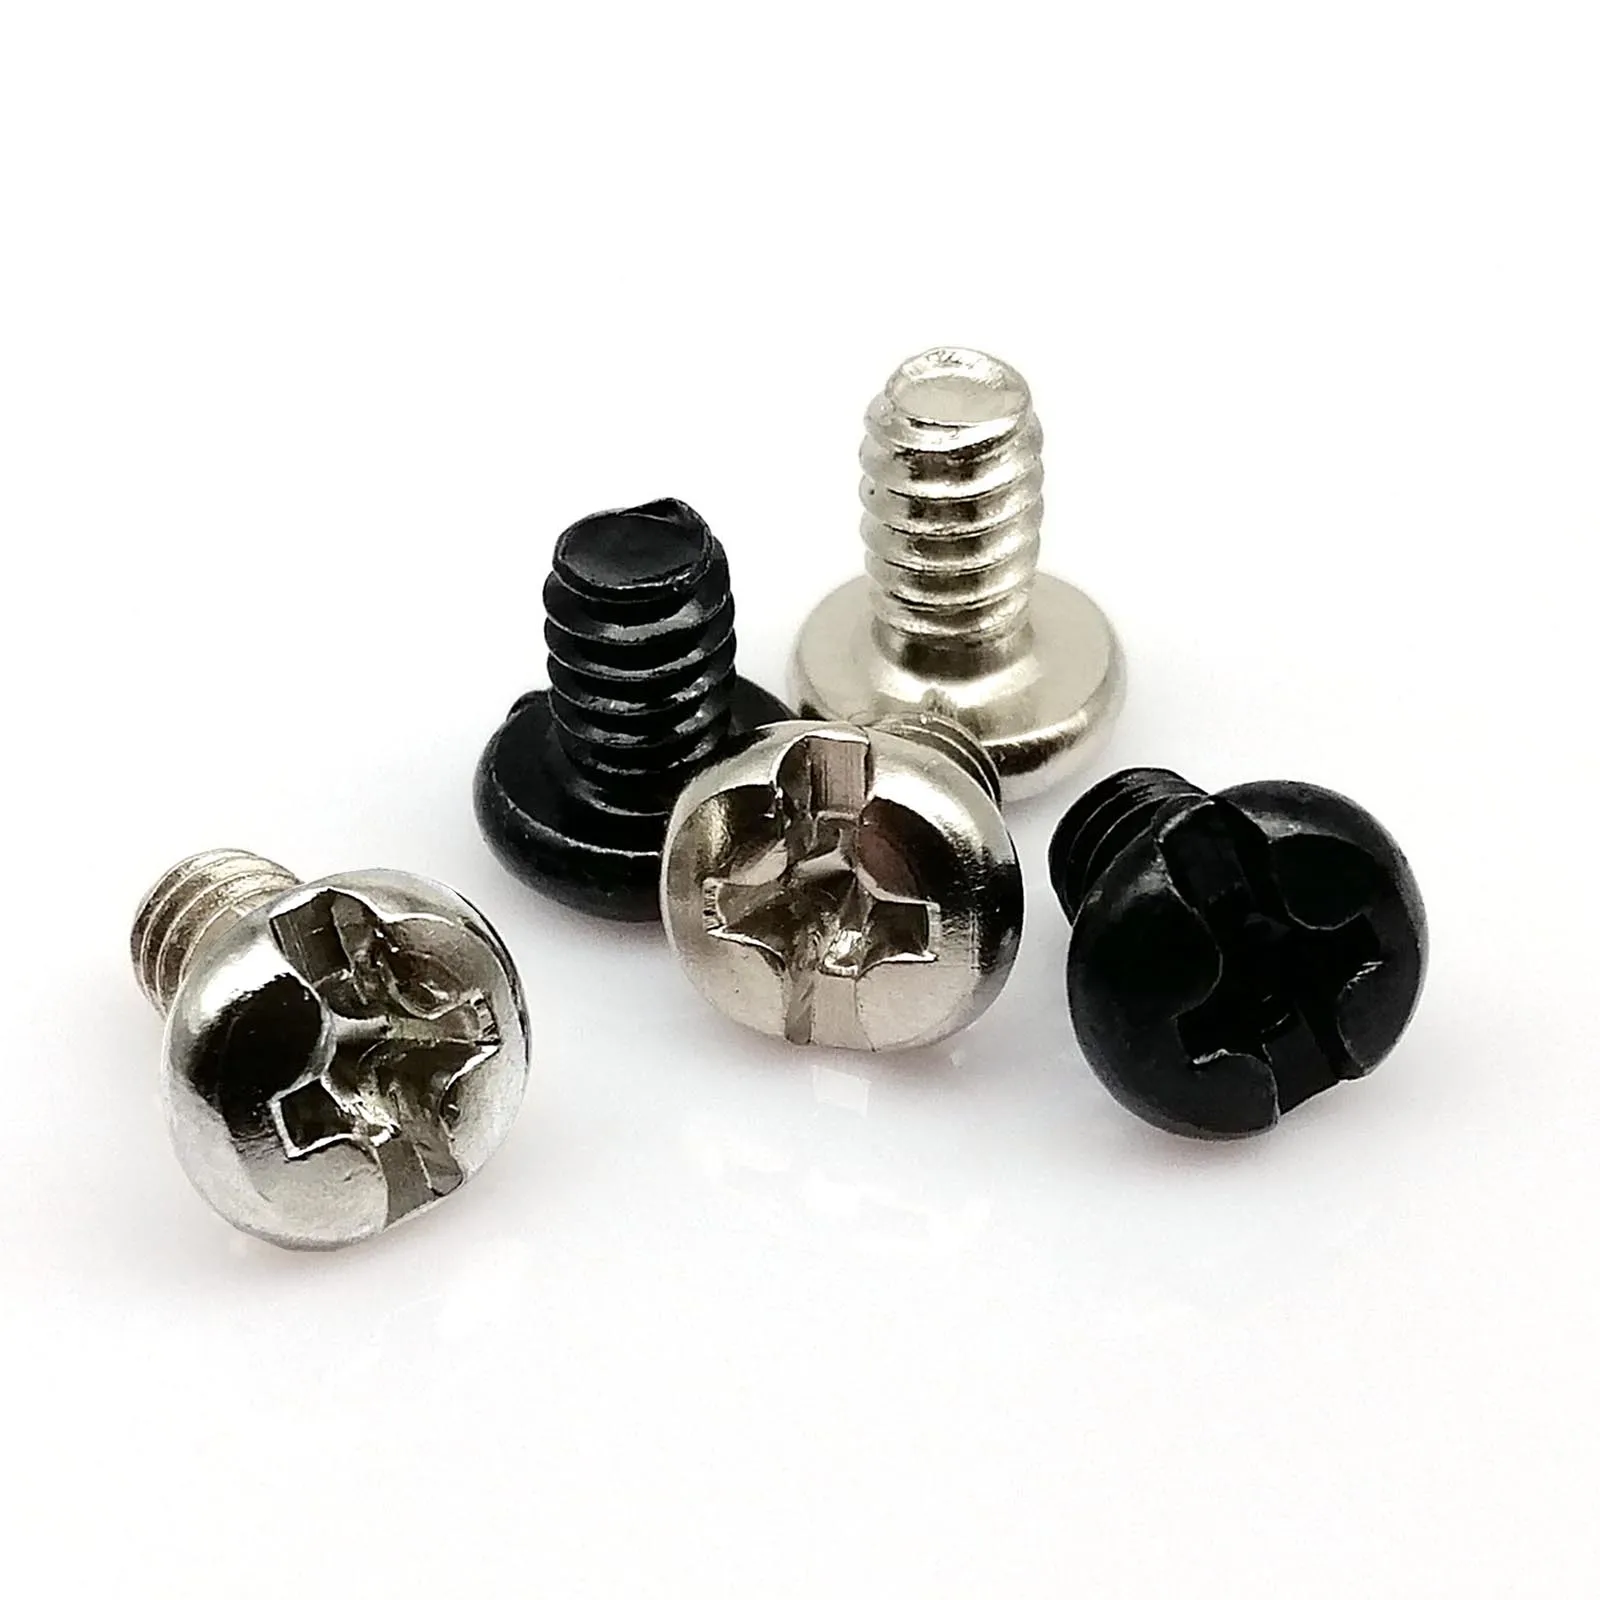 

25pcs Phillips Round Head Screw 6#-32*5mm for Hard Drive Disk HDD PC Case PSU Sound Video Graphics Card Fix DIY Mount Computer E